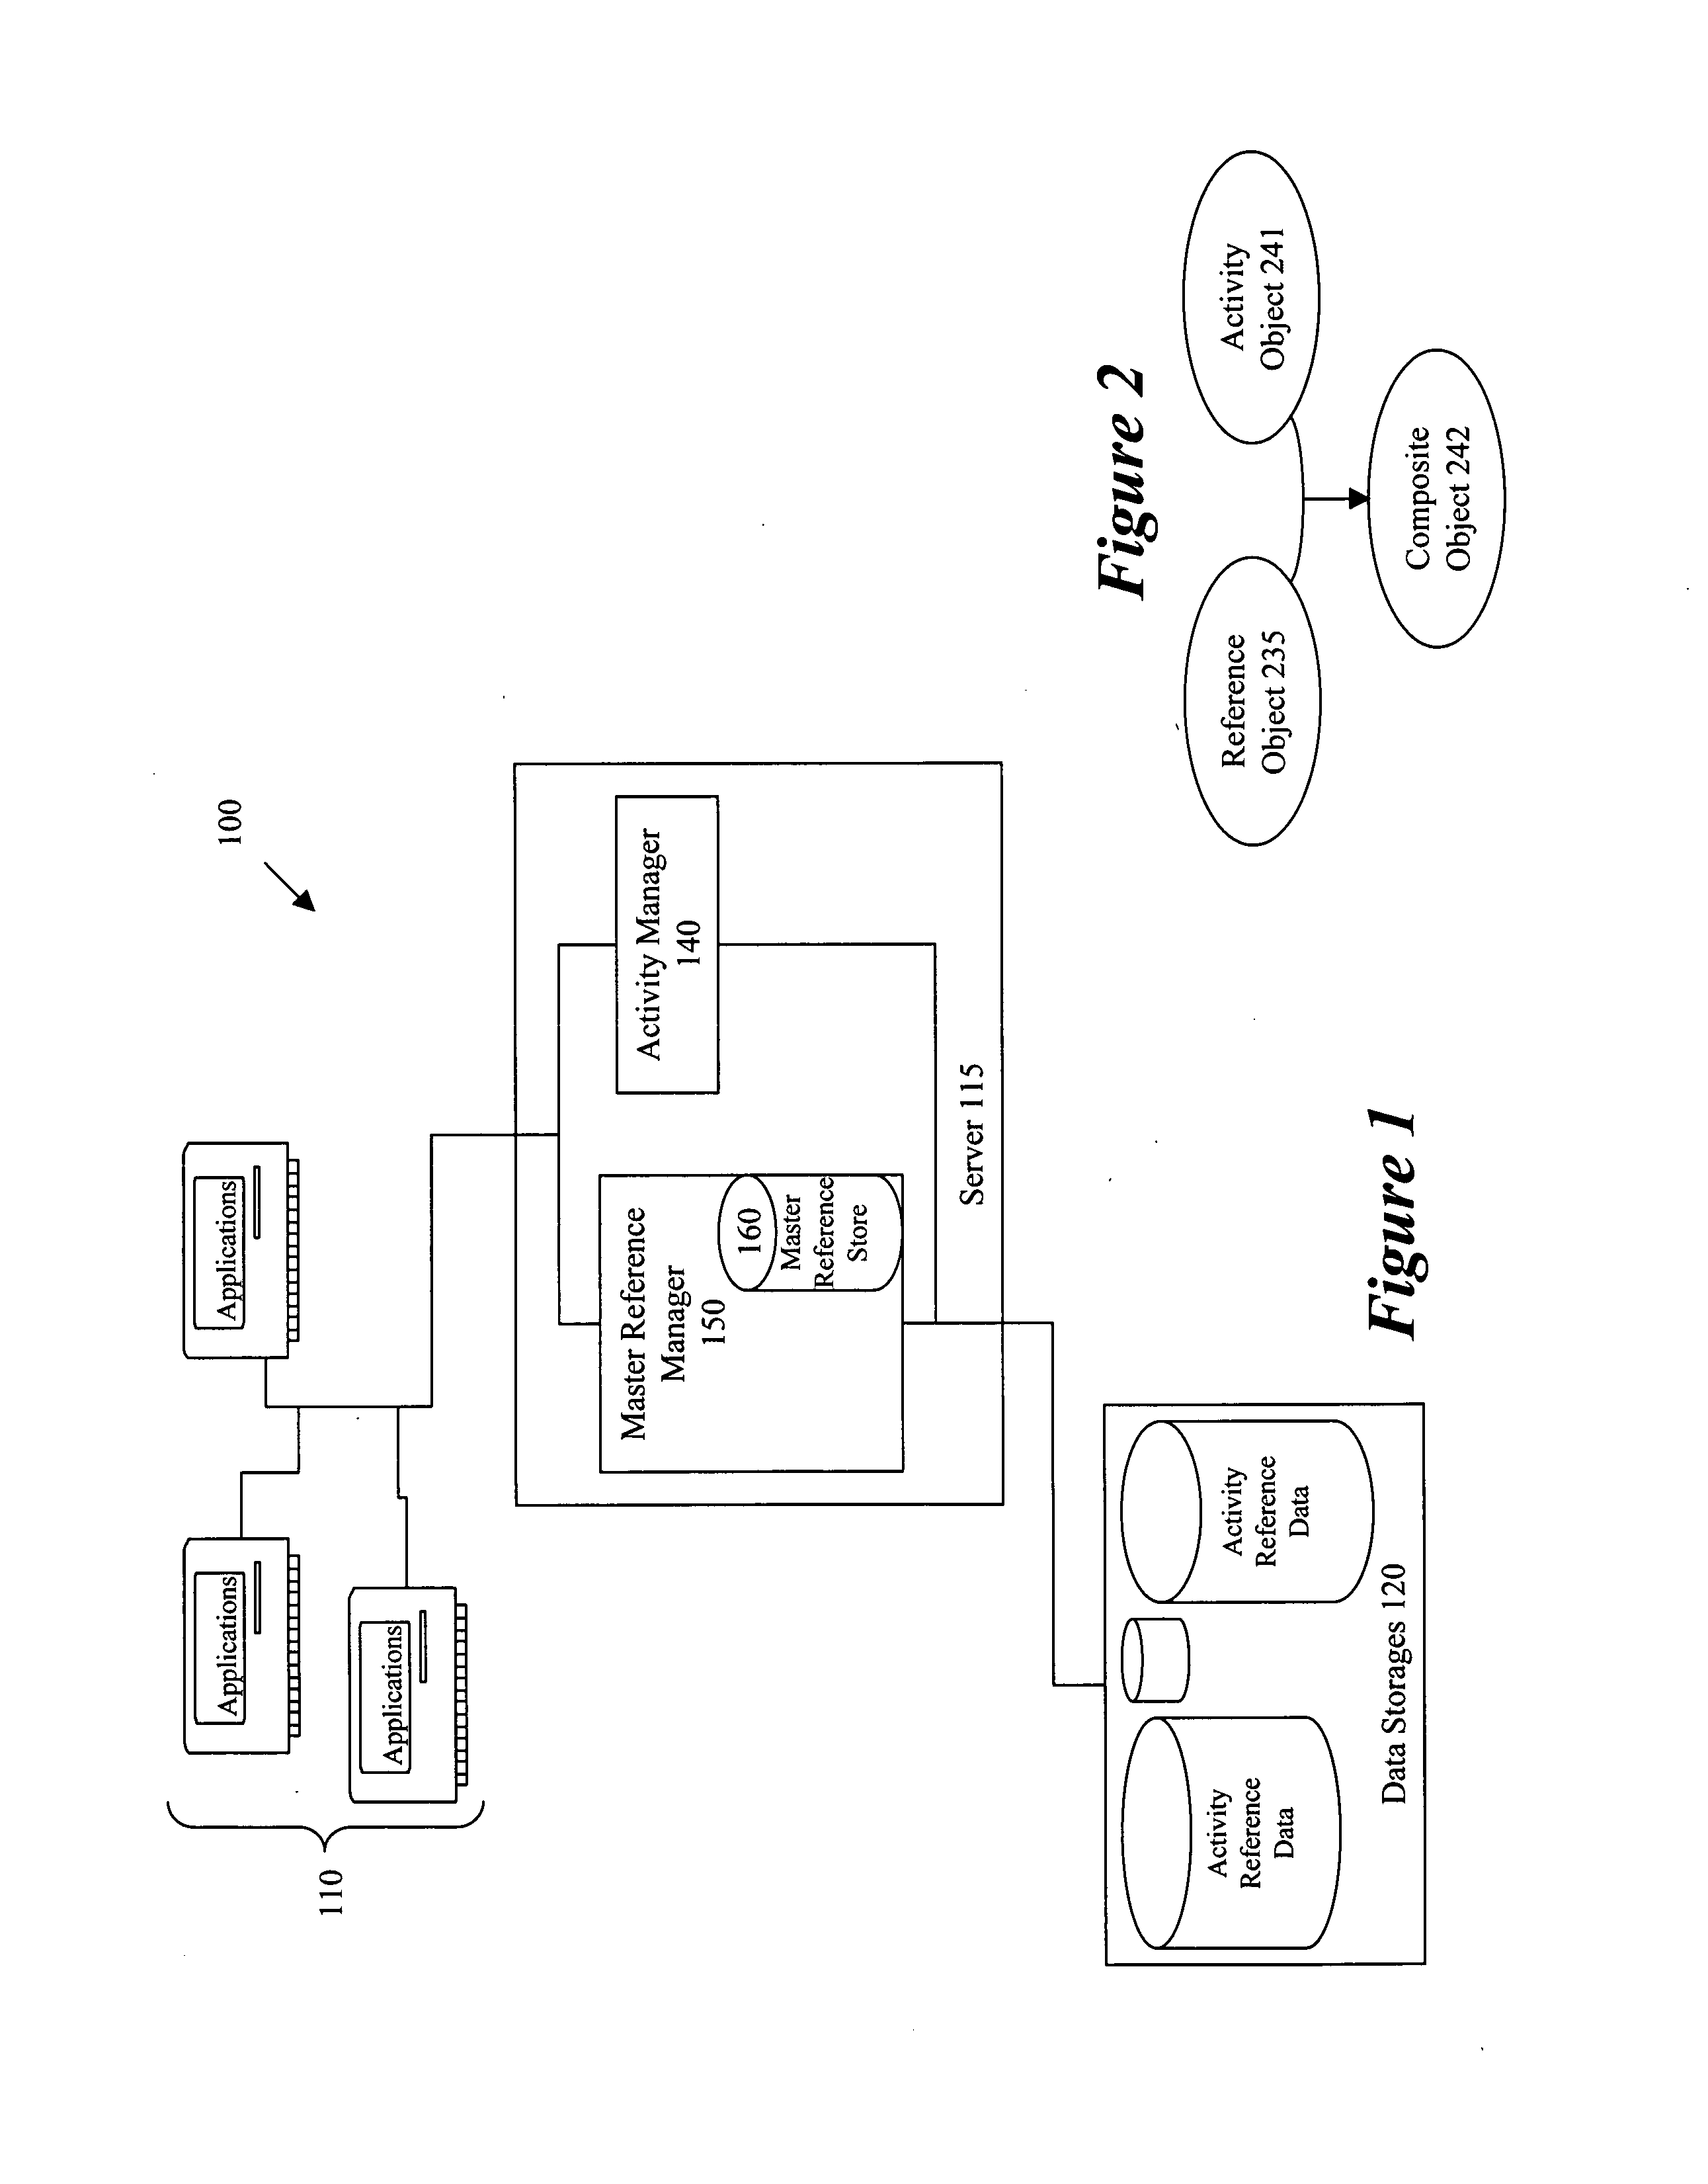 Method and apparatus for data integration and management